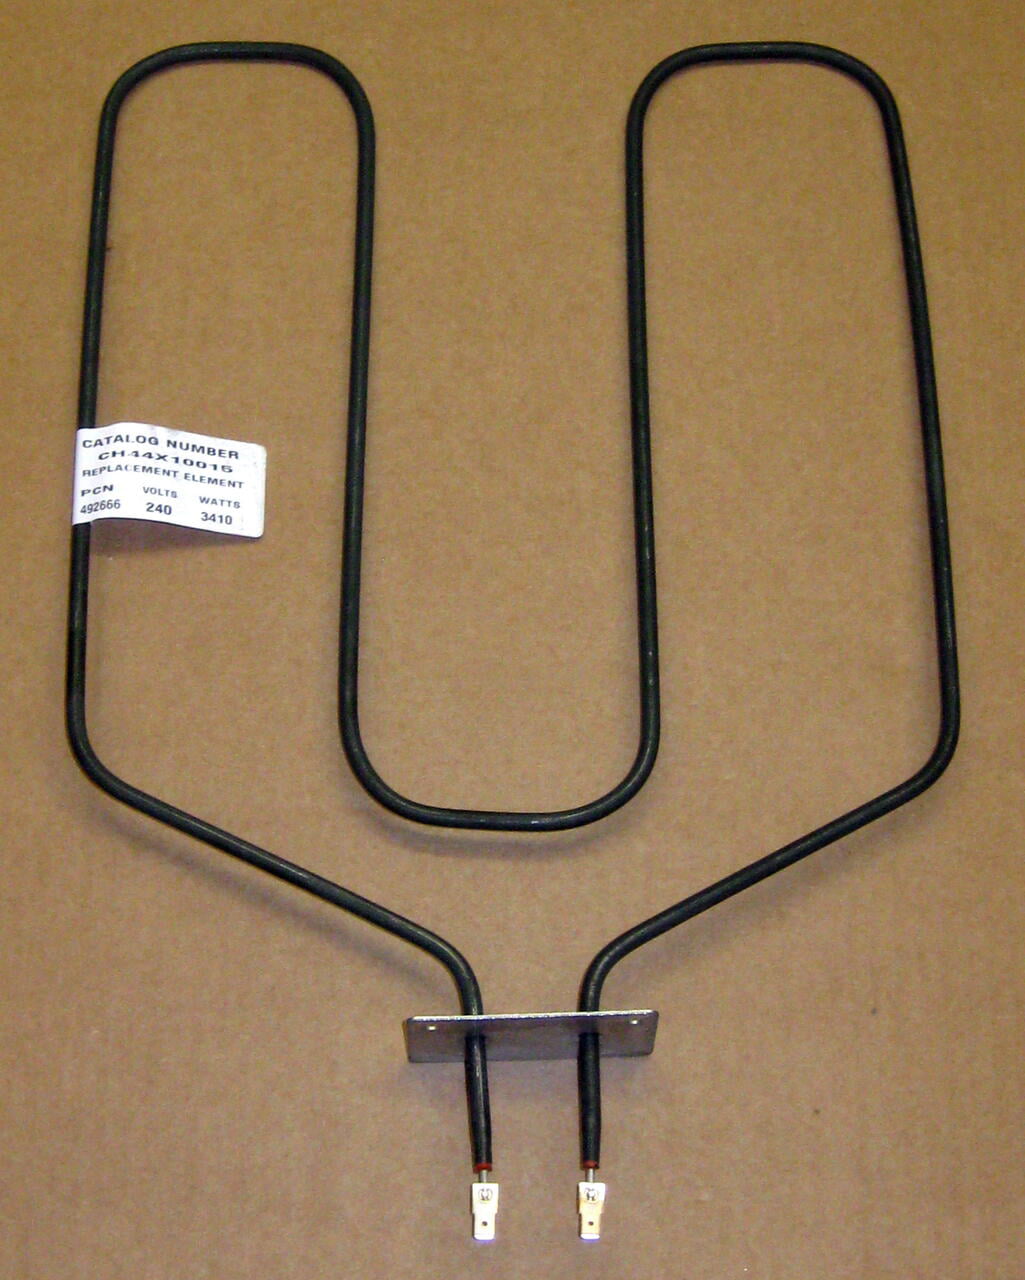 New OEM Oven Element CH2858 